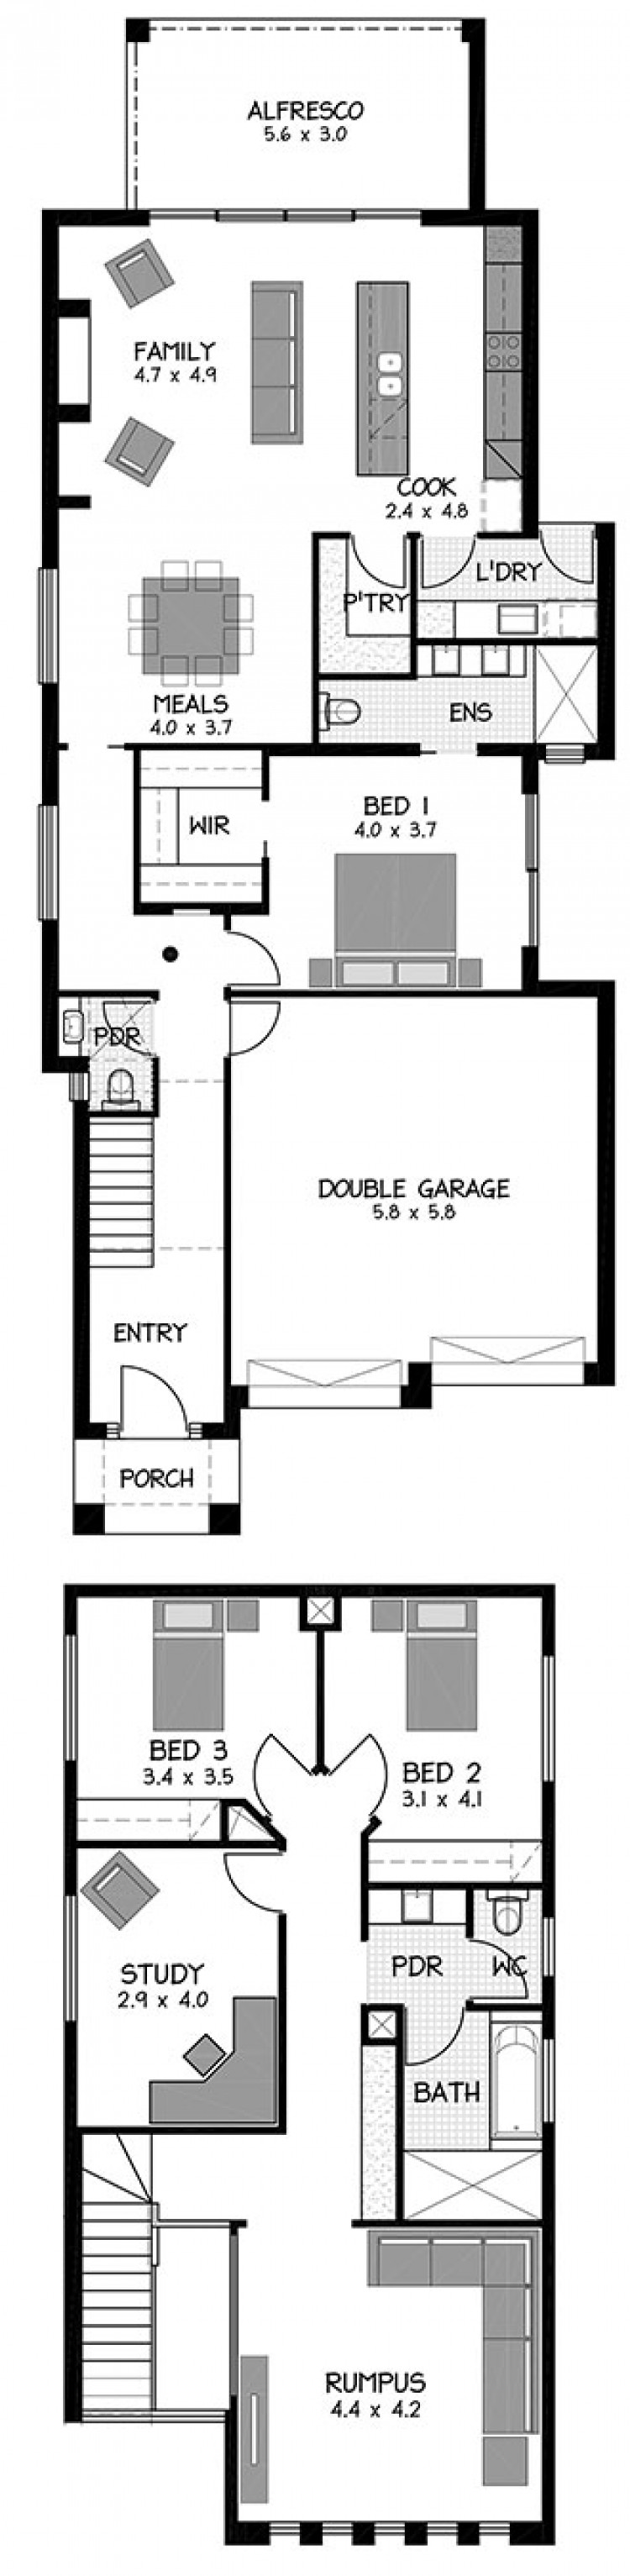 Rossdale Homes Holdfast Floor plans ScaleWidthWzc1MF0 v2